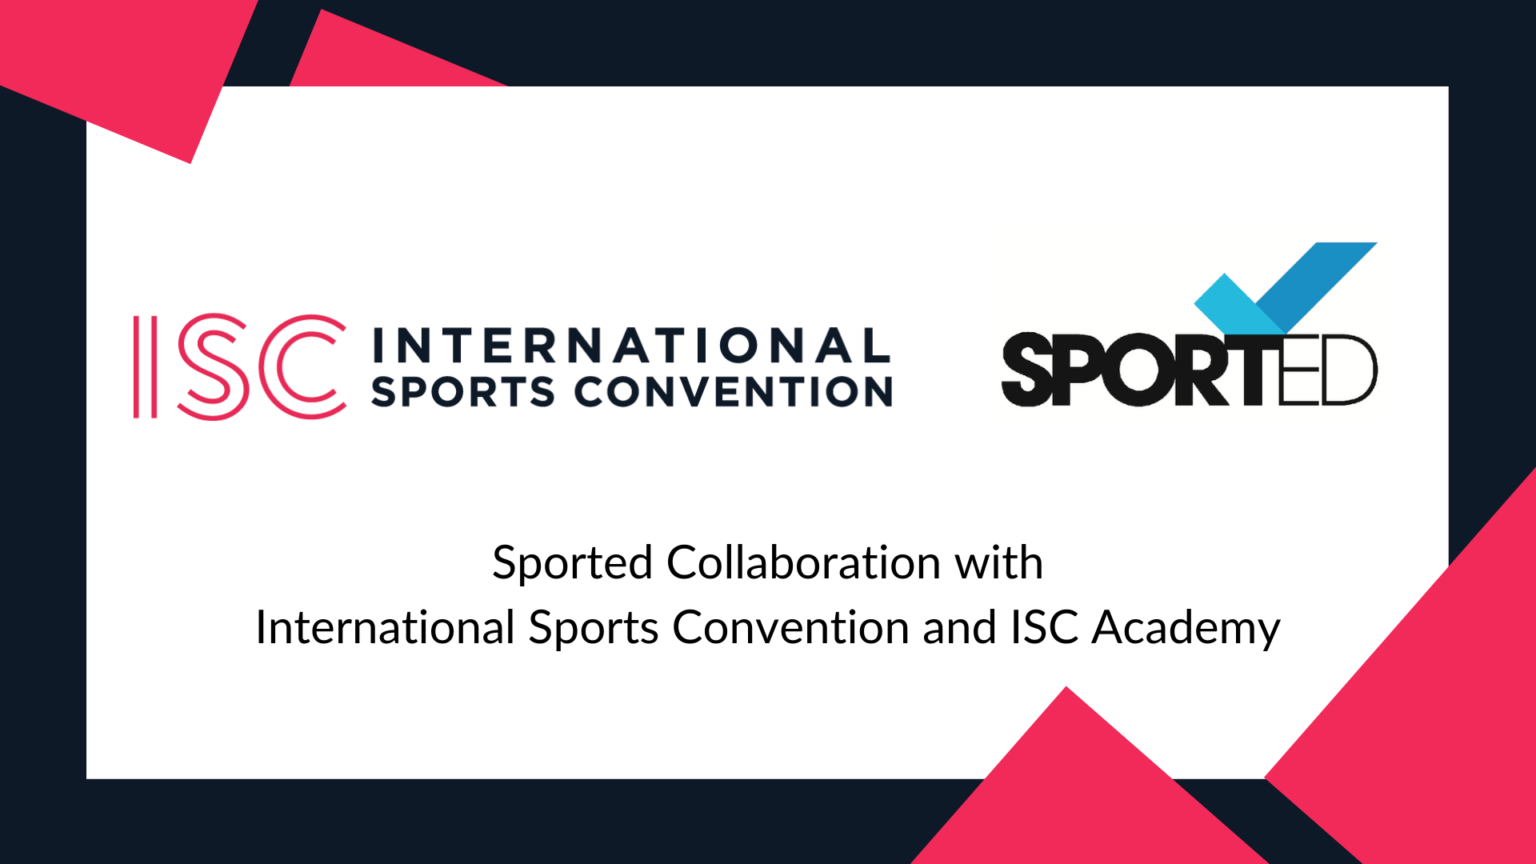 Sported Collaboration with International Sports Convention and ISC